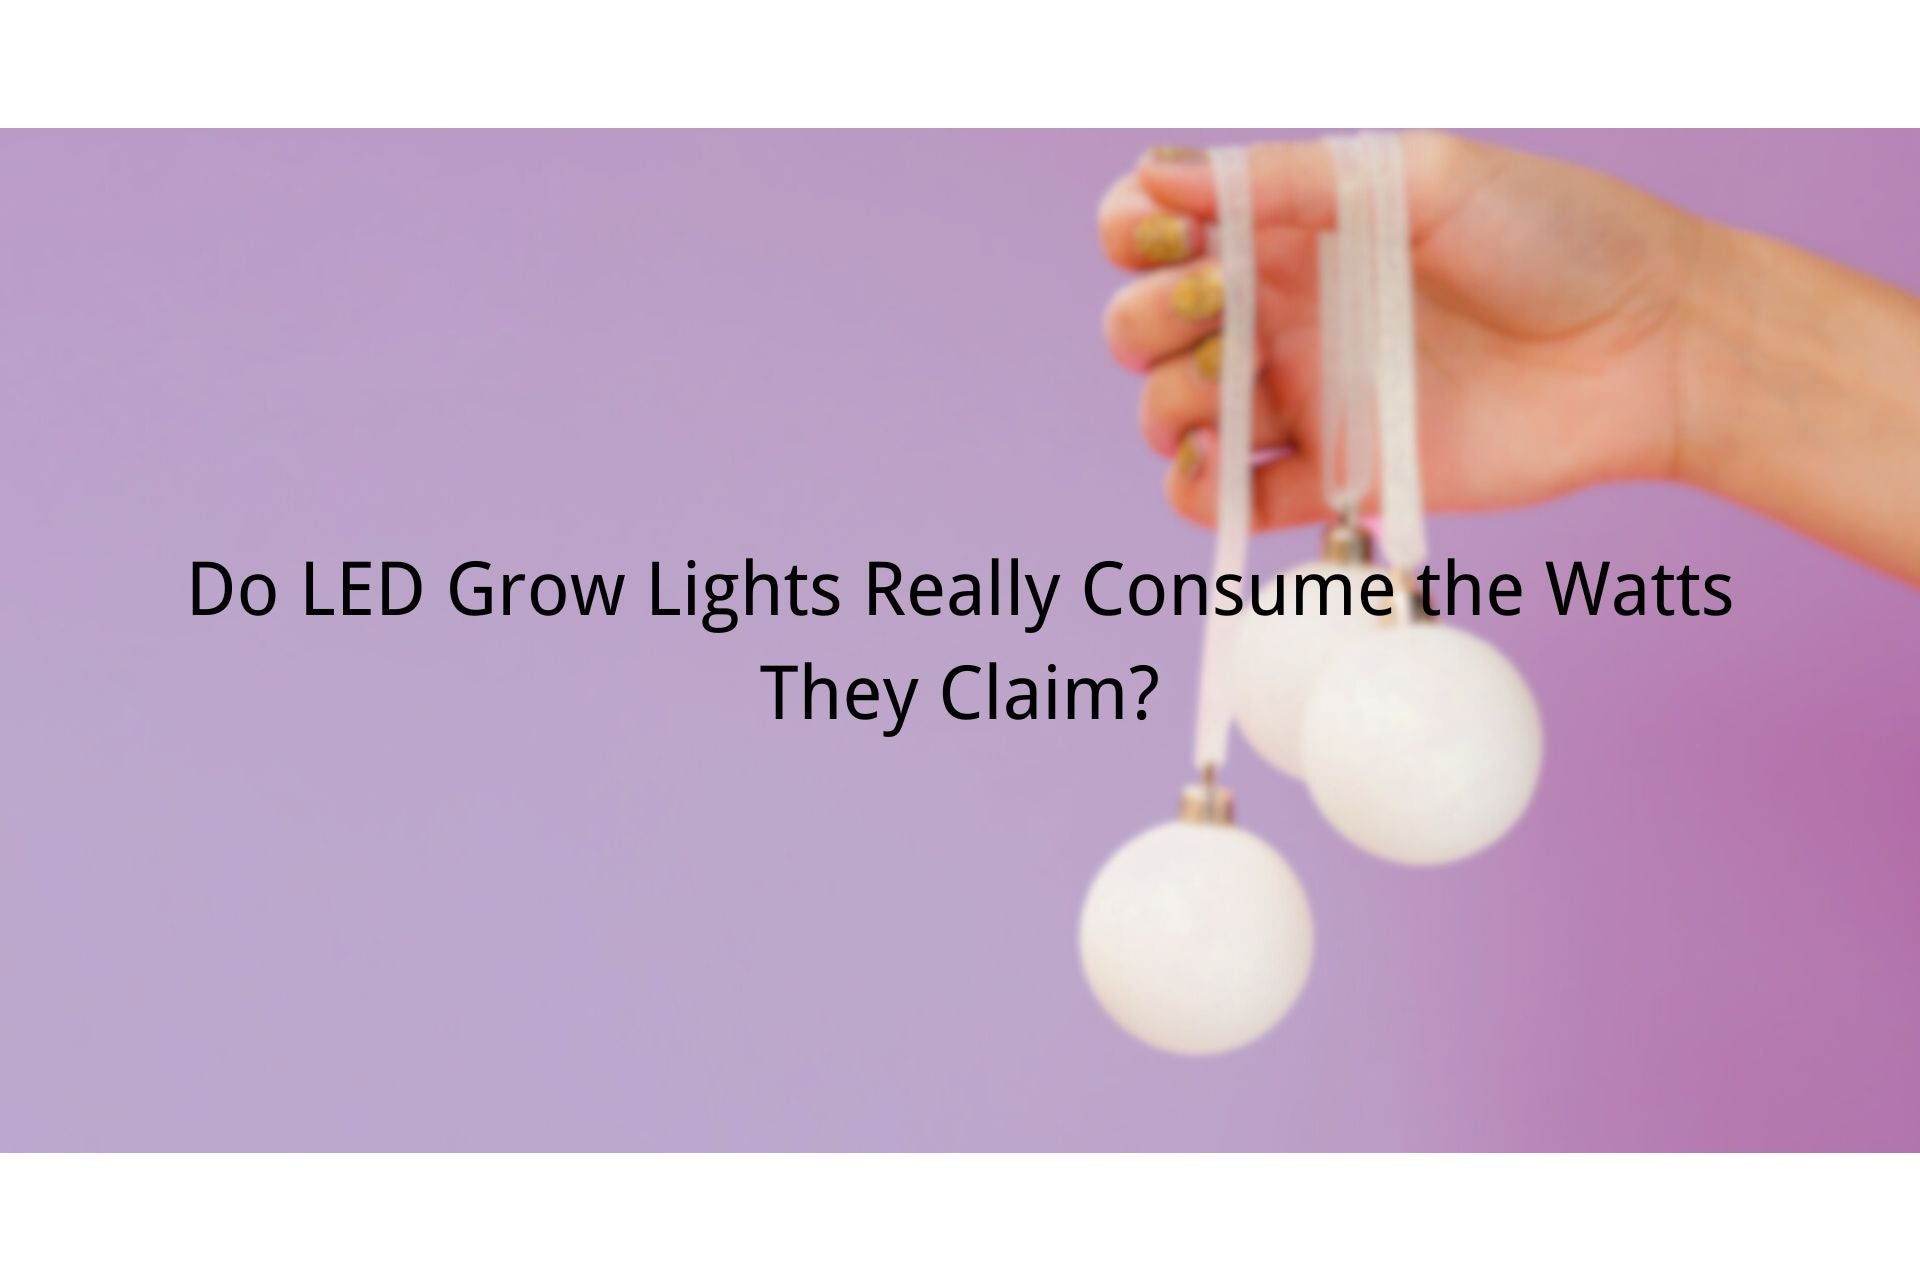 Do LED Grow Lights Really Consume the Watts They Claim?